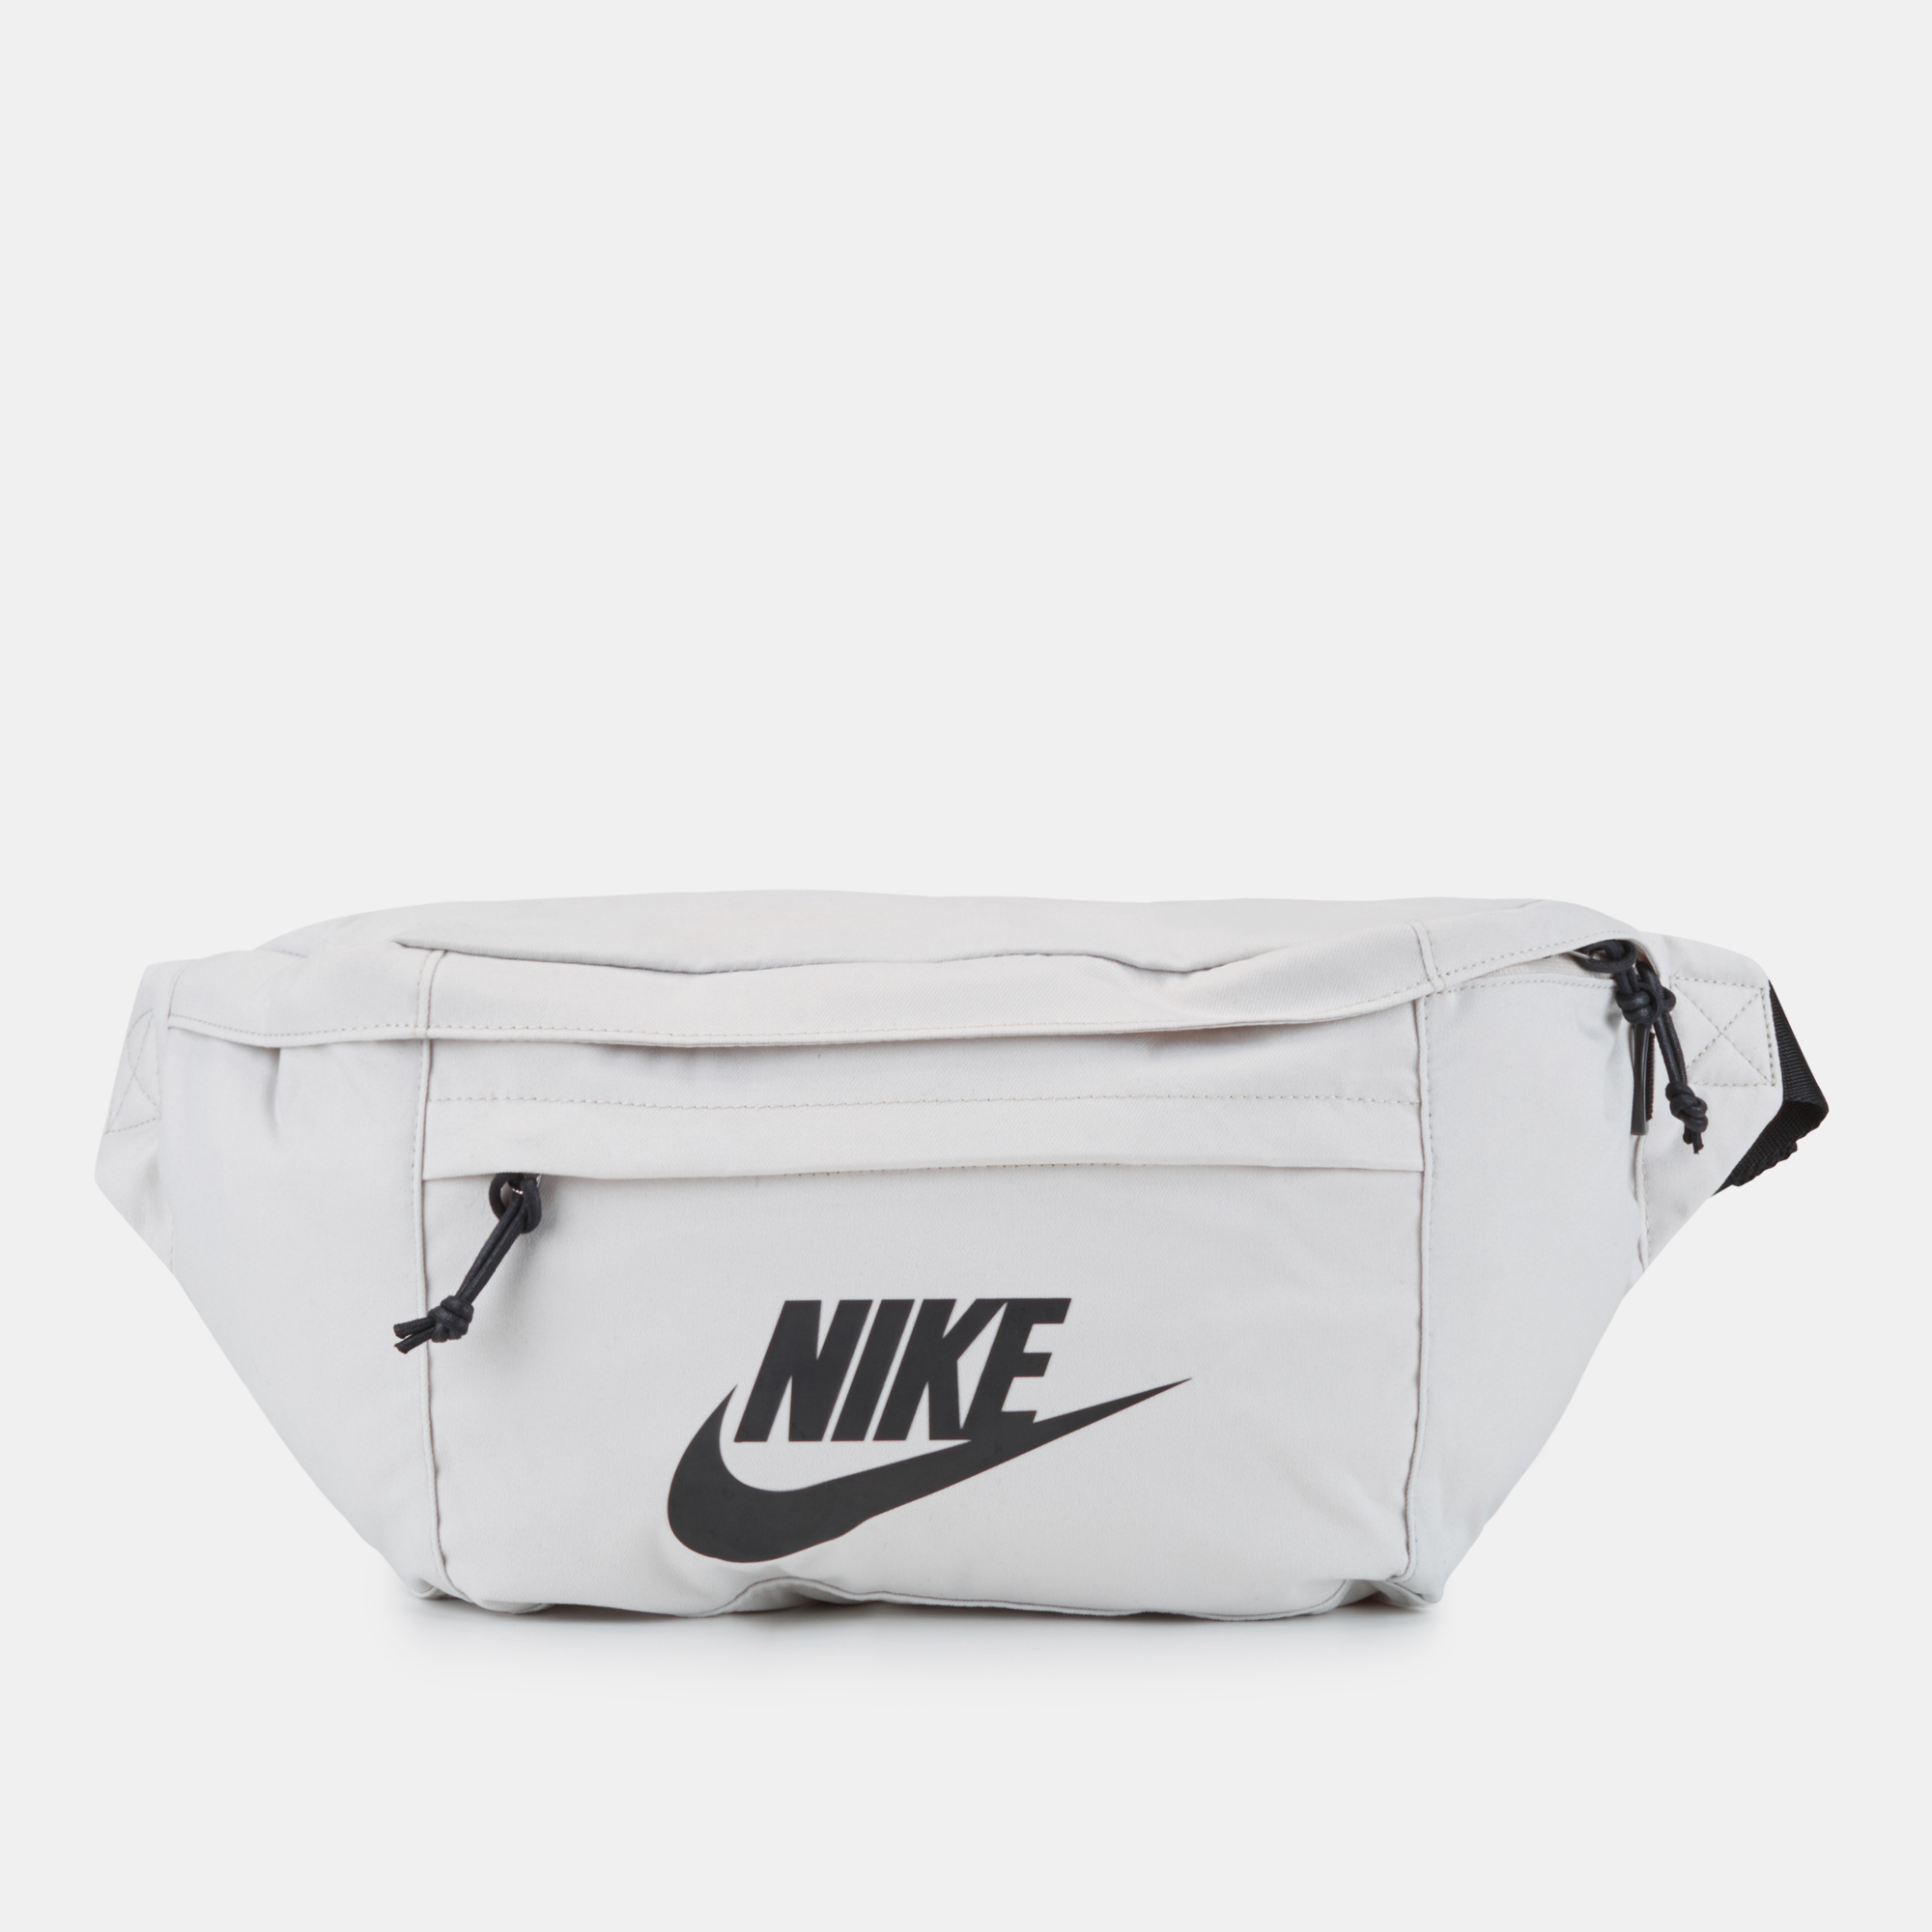 Nike Tech Hip Pack | Tote Bags | Bags and Luggage | Accessories | Men's ...